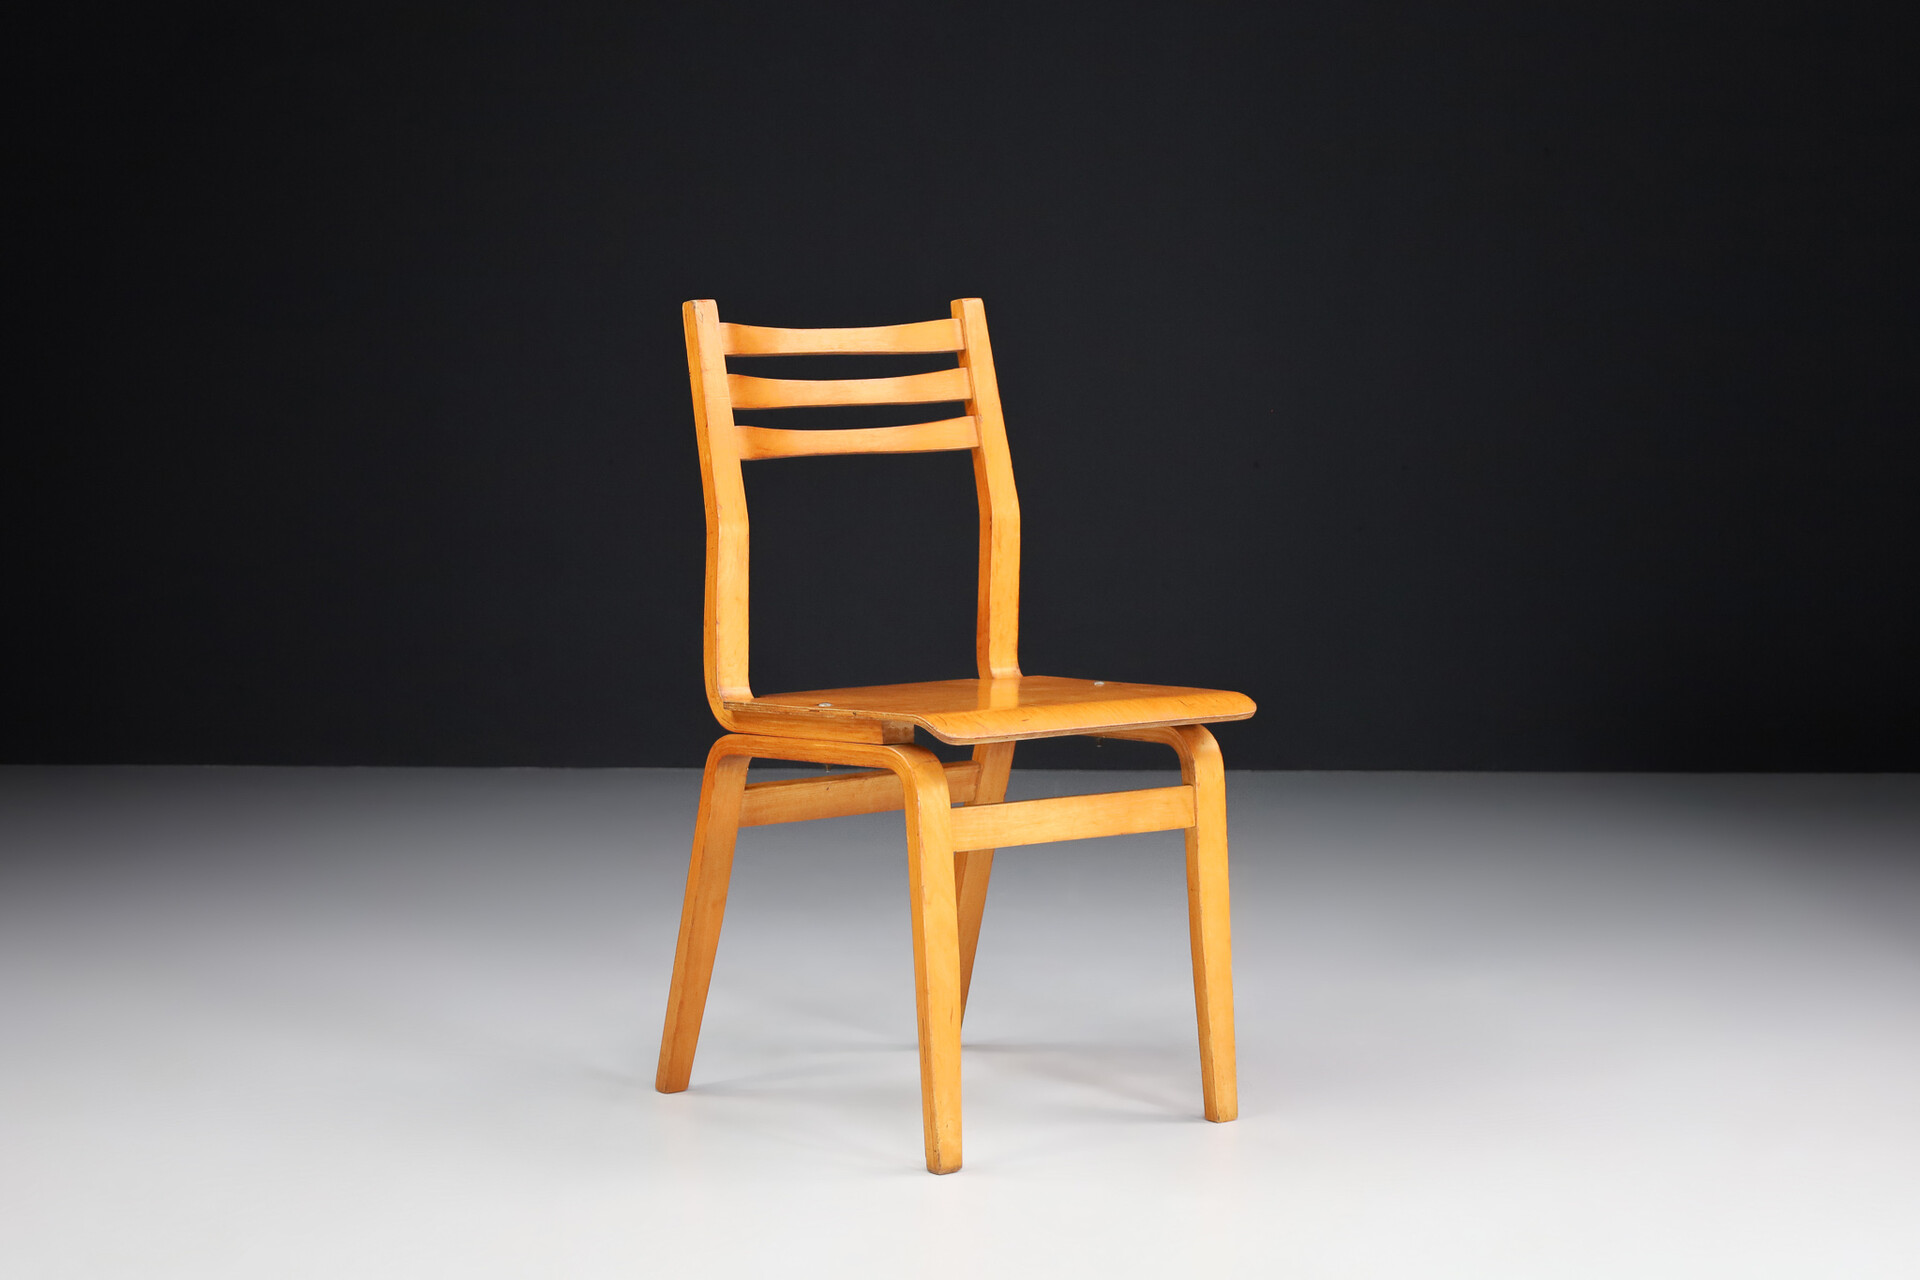 Set of 21 Plywood/Bentwood chairs, Praque 1960s Mid-20th century